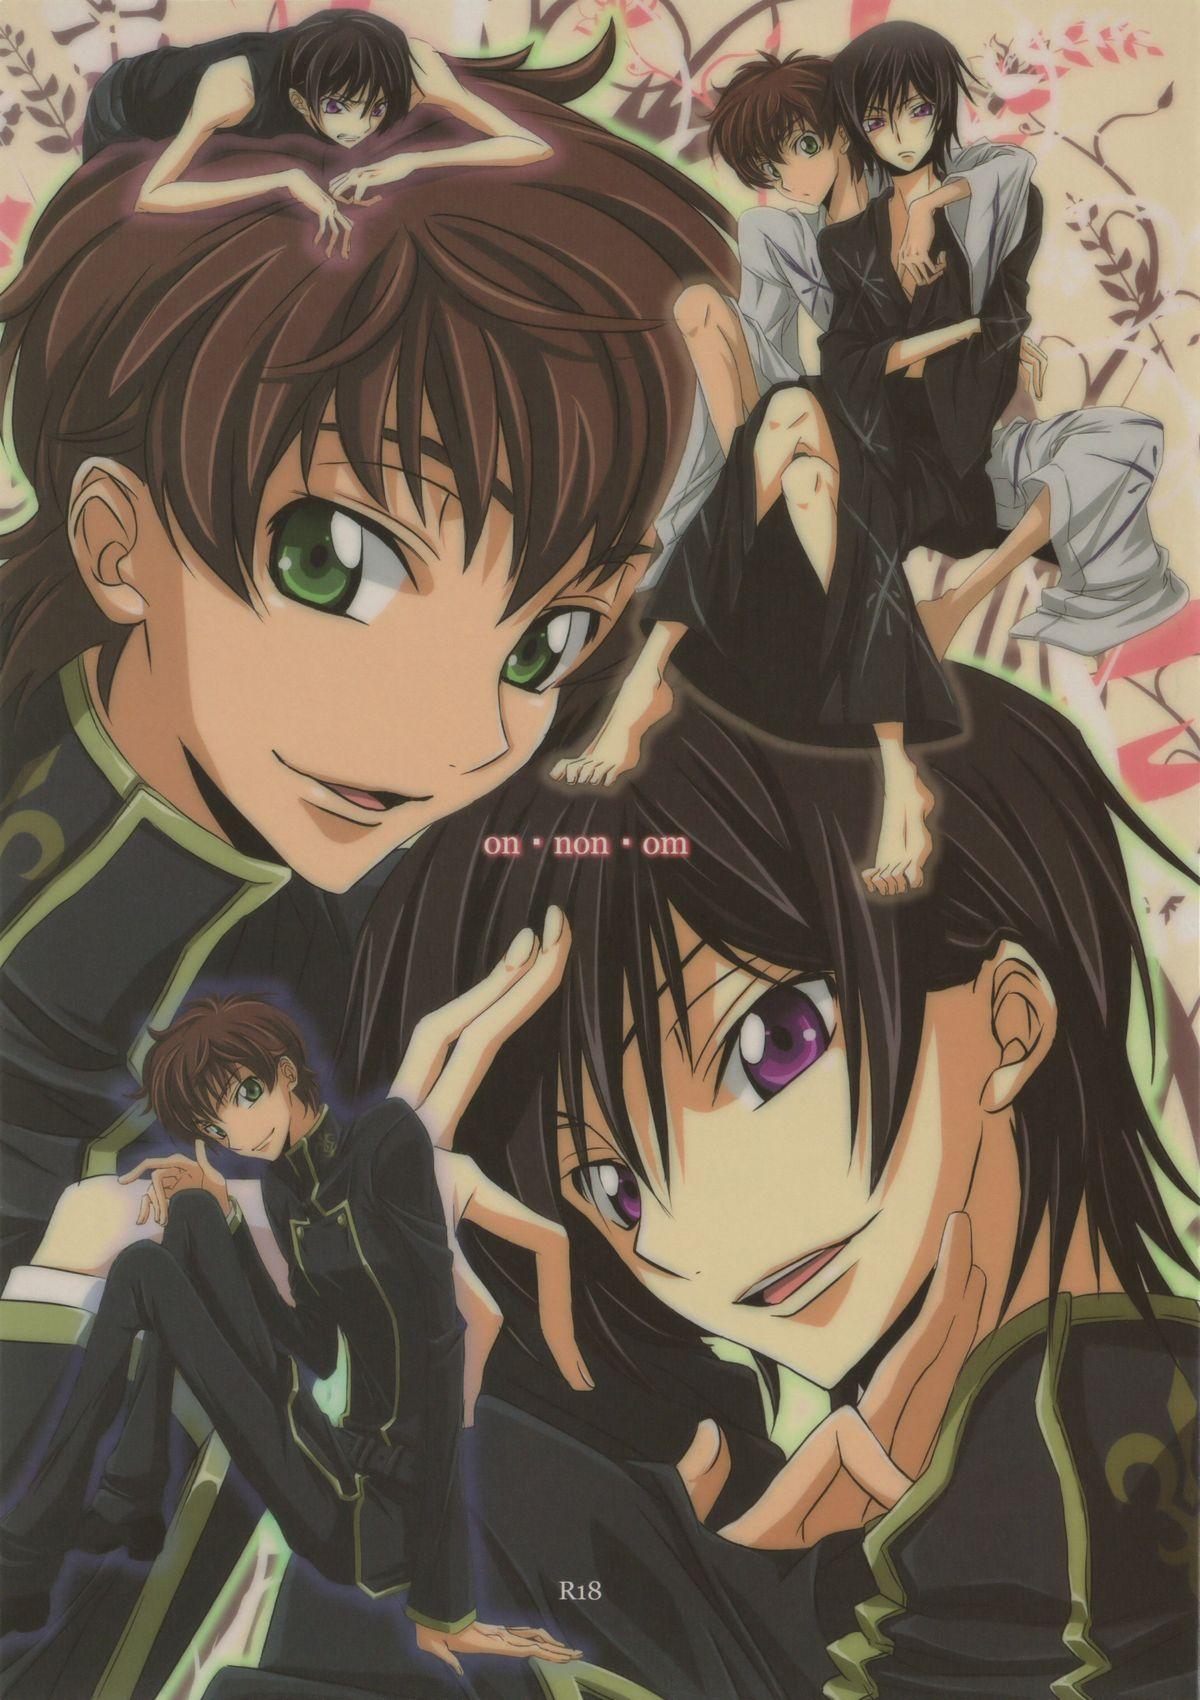 Dyke on・non・om - Code geass Booty - Page 1